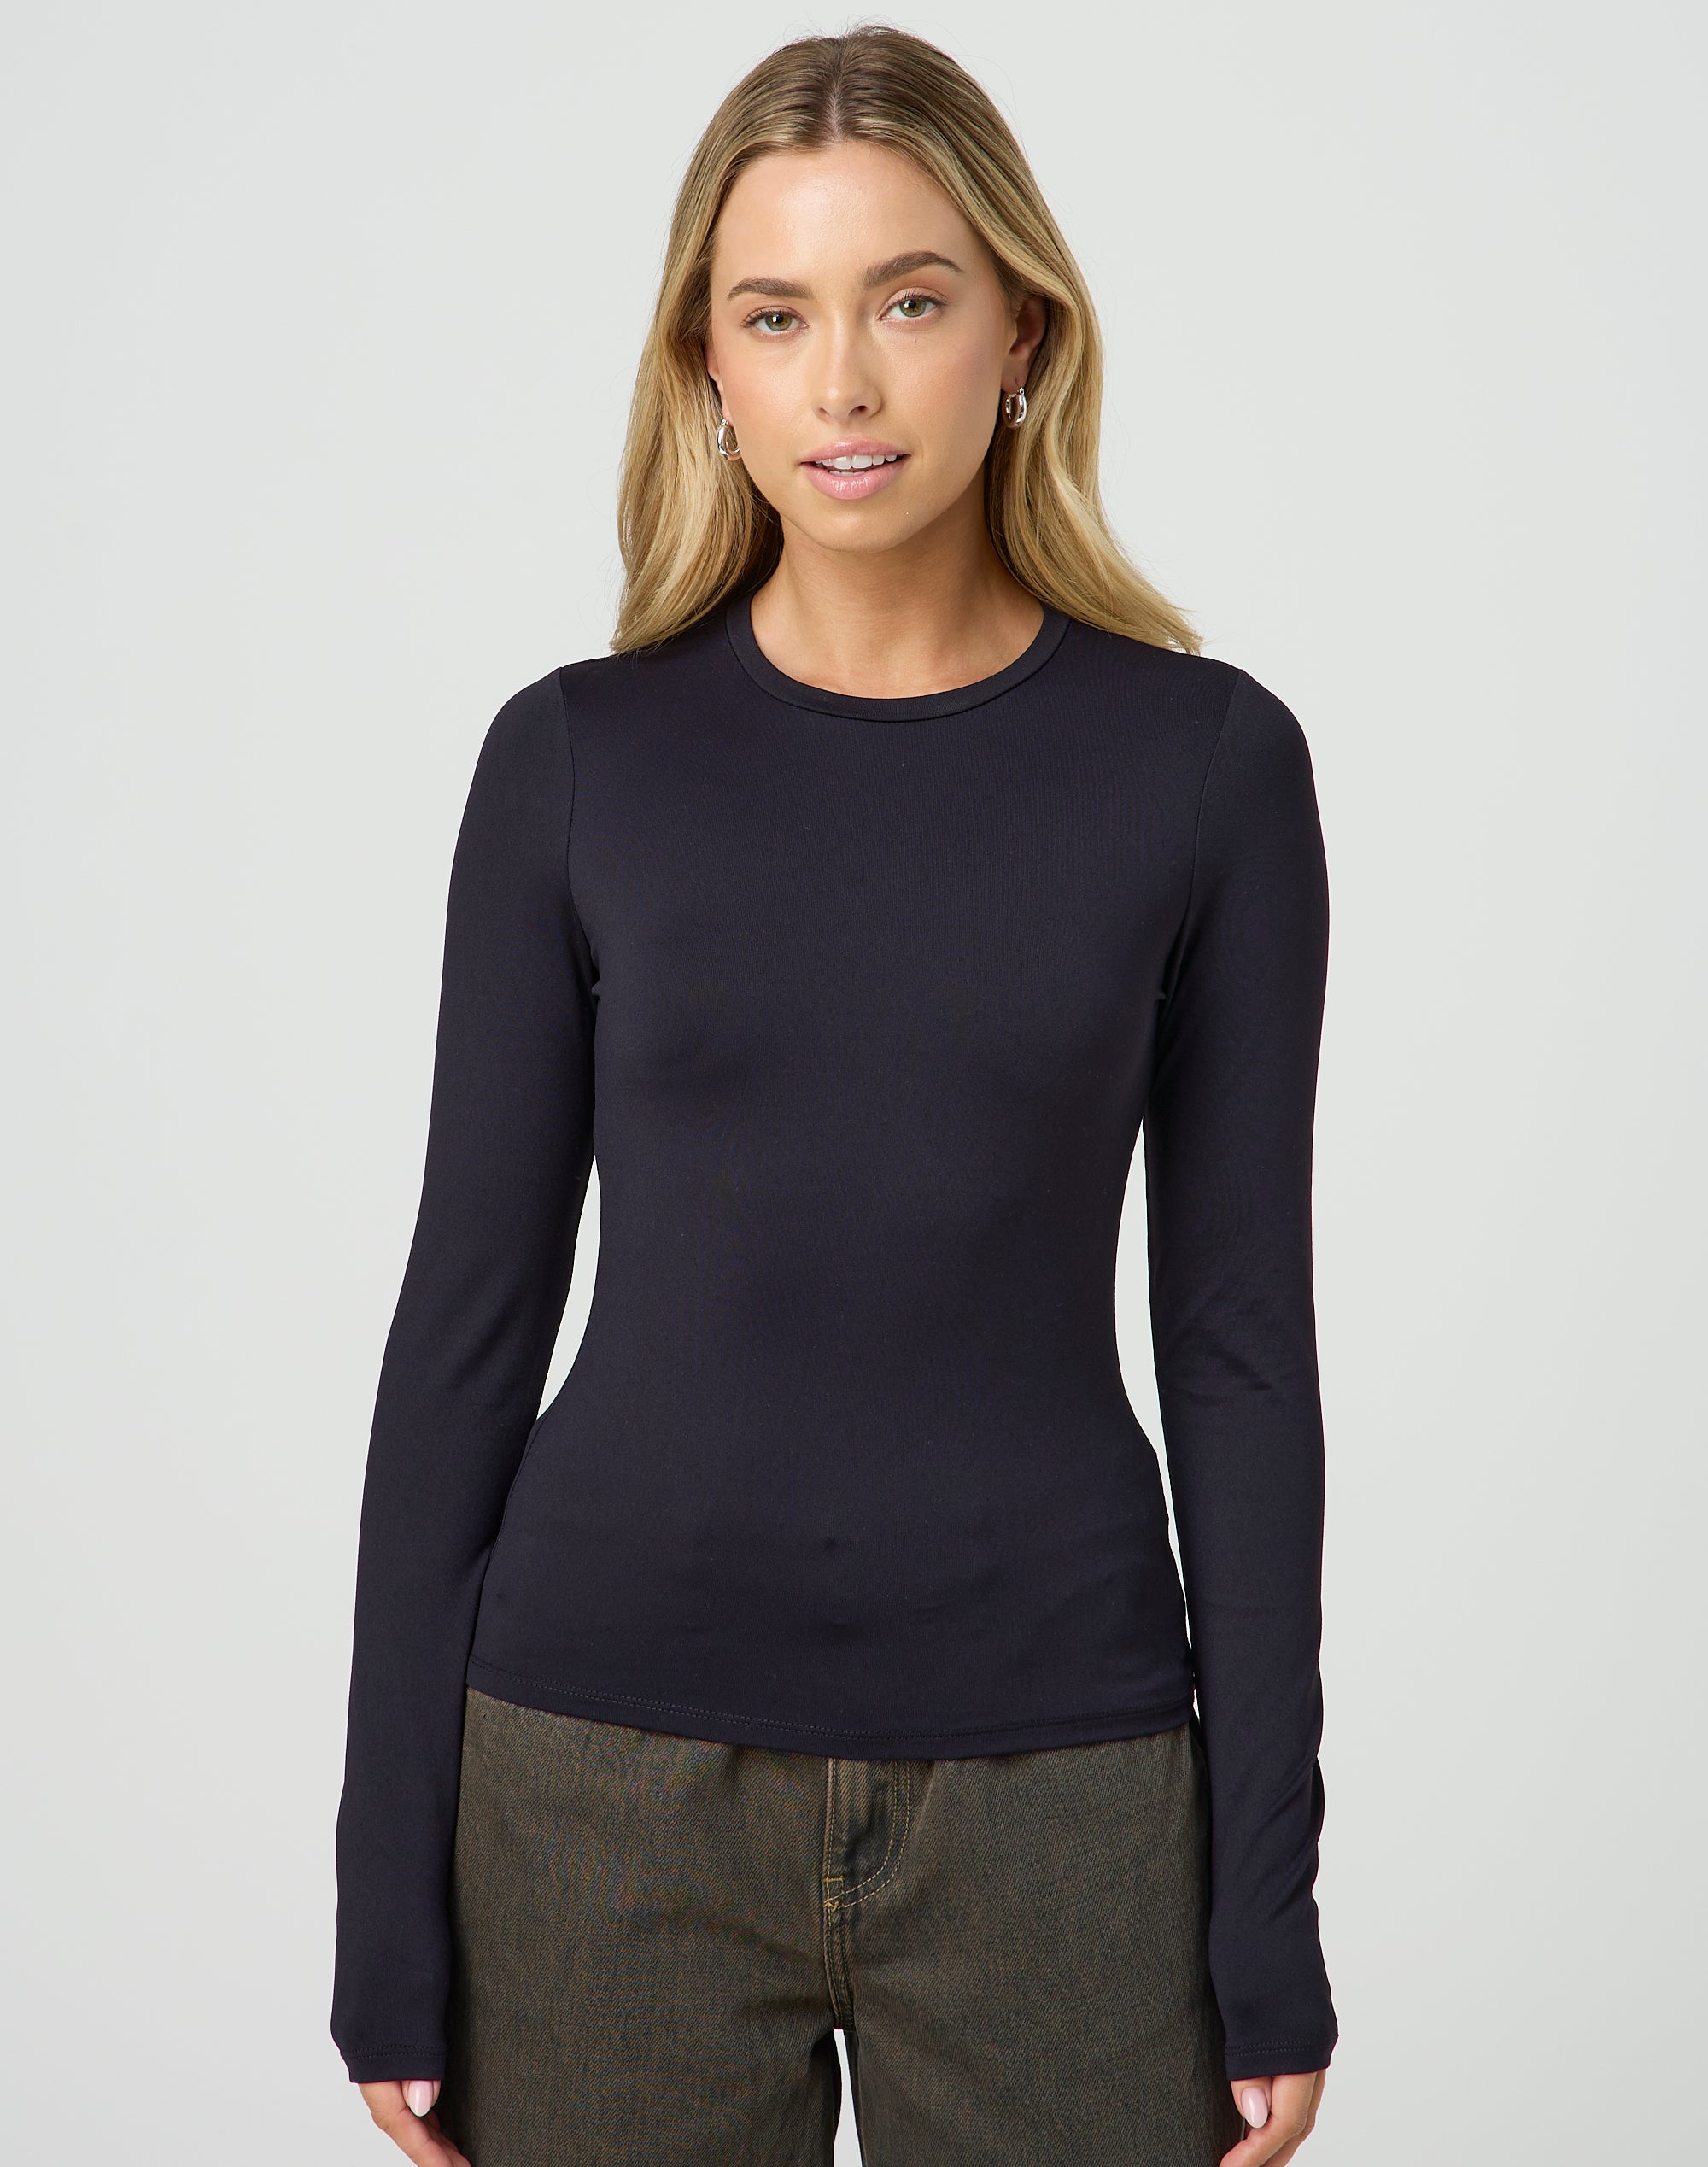 https://www.glassons.com/content/products/limmy-slinky-longsleeve-black-front-tl55301pch.jpg